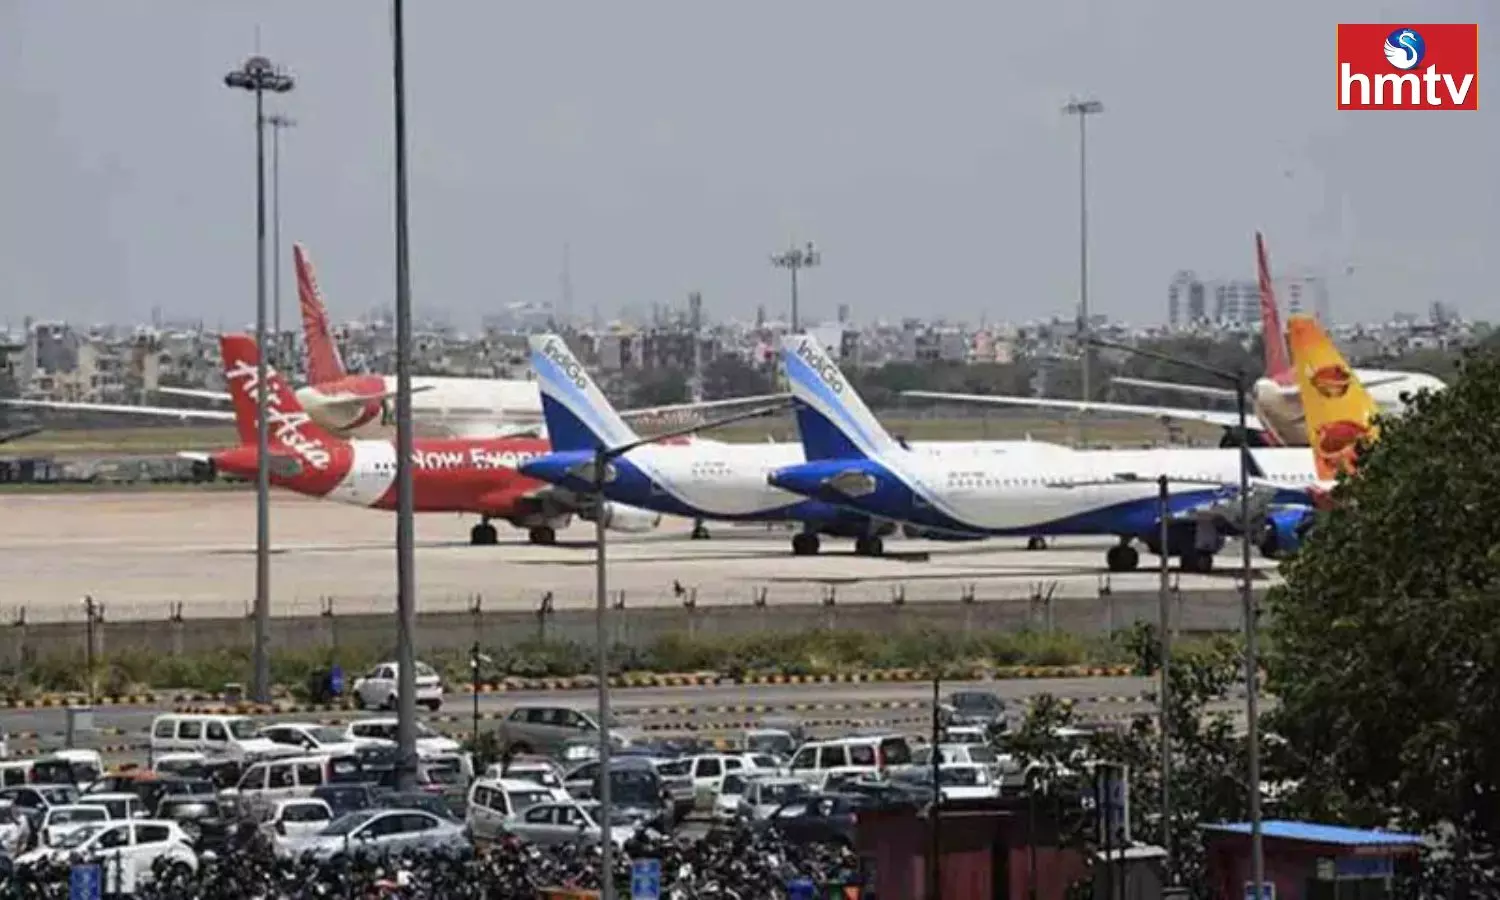 Restrictions On Flight Ops At Delhi Airport From Jan 19 To 26 Due To Republic Day Preps